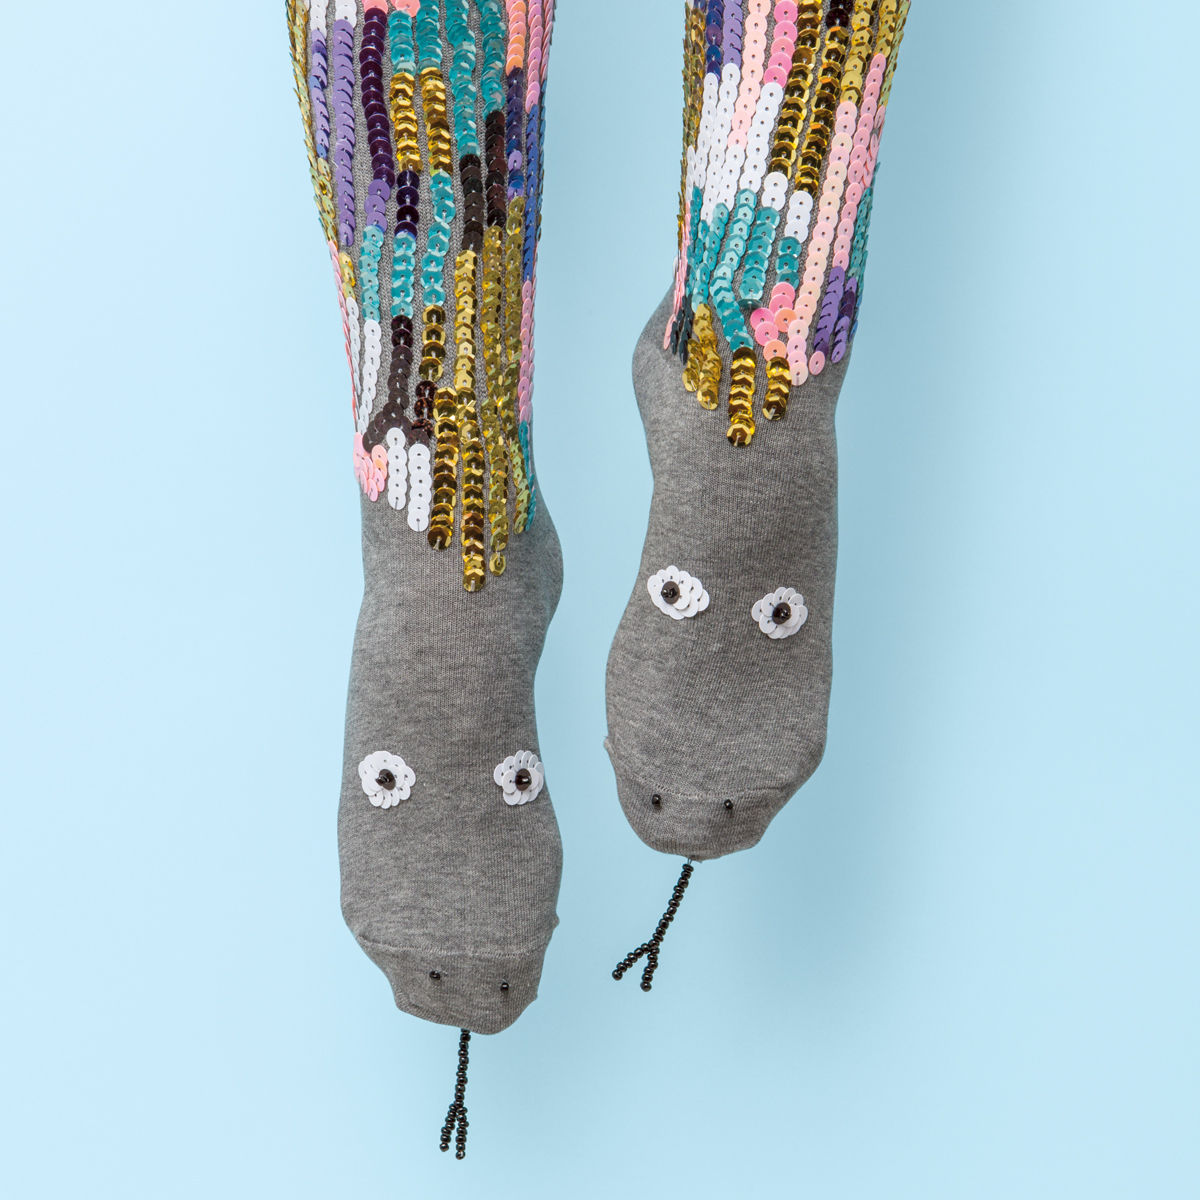 FrankieMag must-have socks snakes on a foot http://weirdatheart.com/absolutely-must-have-socks/